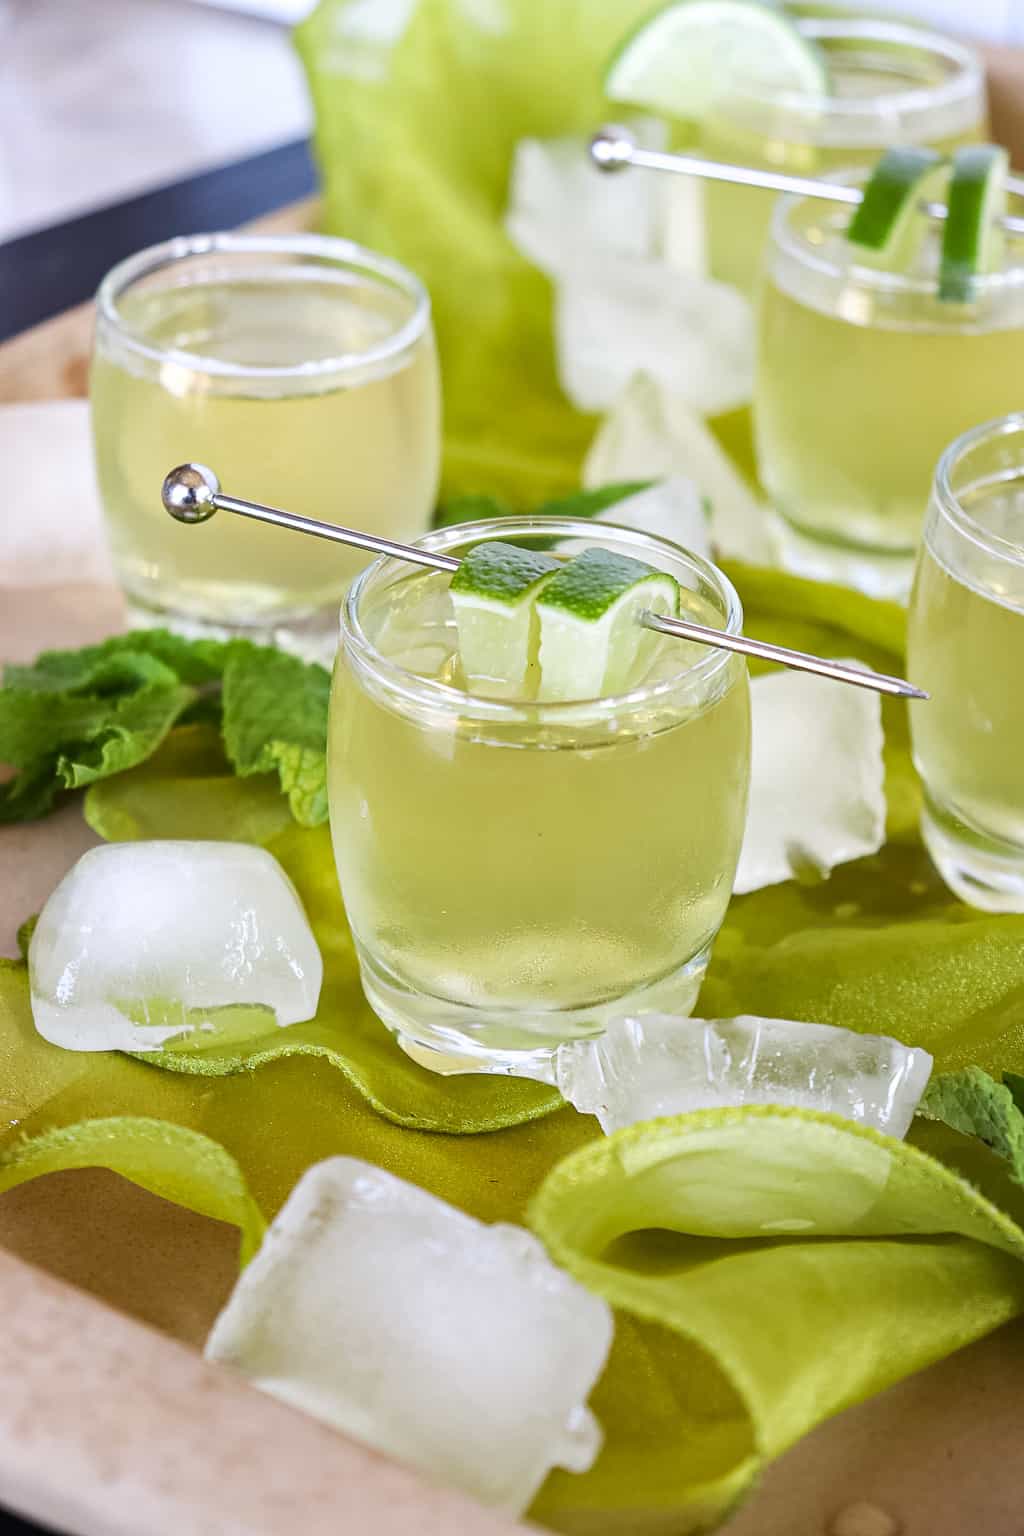 shots on a table with ice cubes around them and a lime wedge on the rim of the shot glass